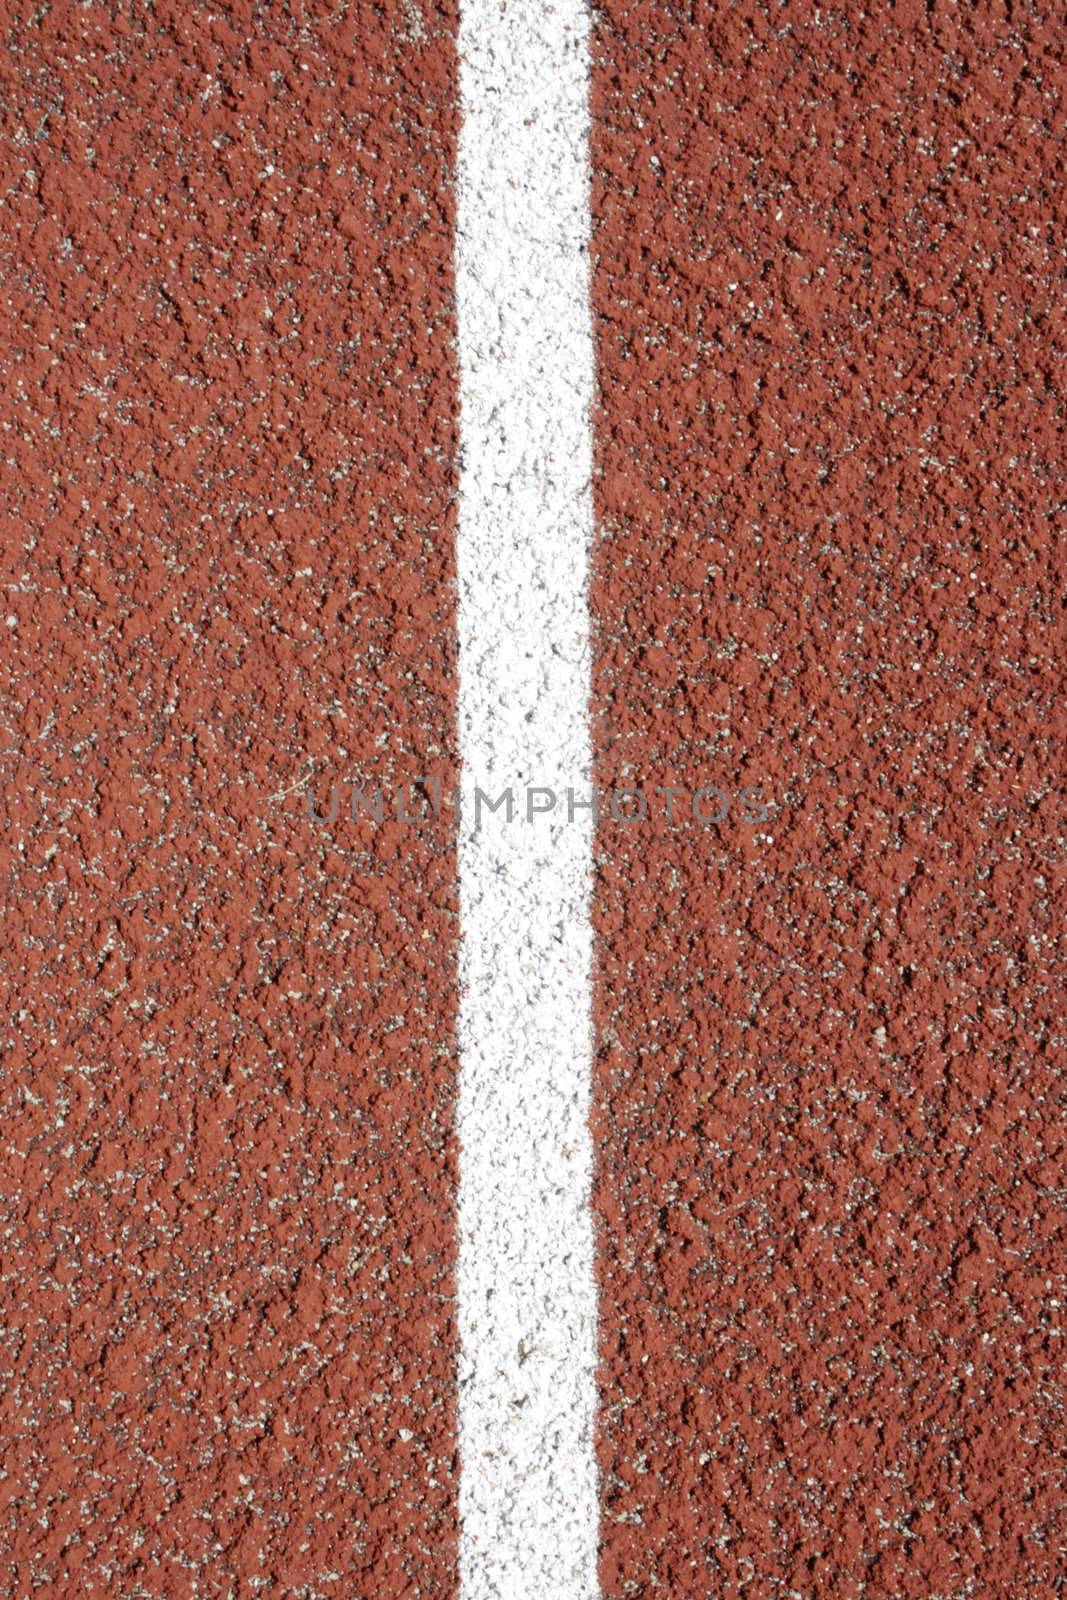 Close-up of a rubber track - outdoor shot